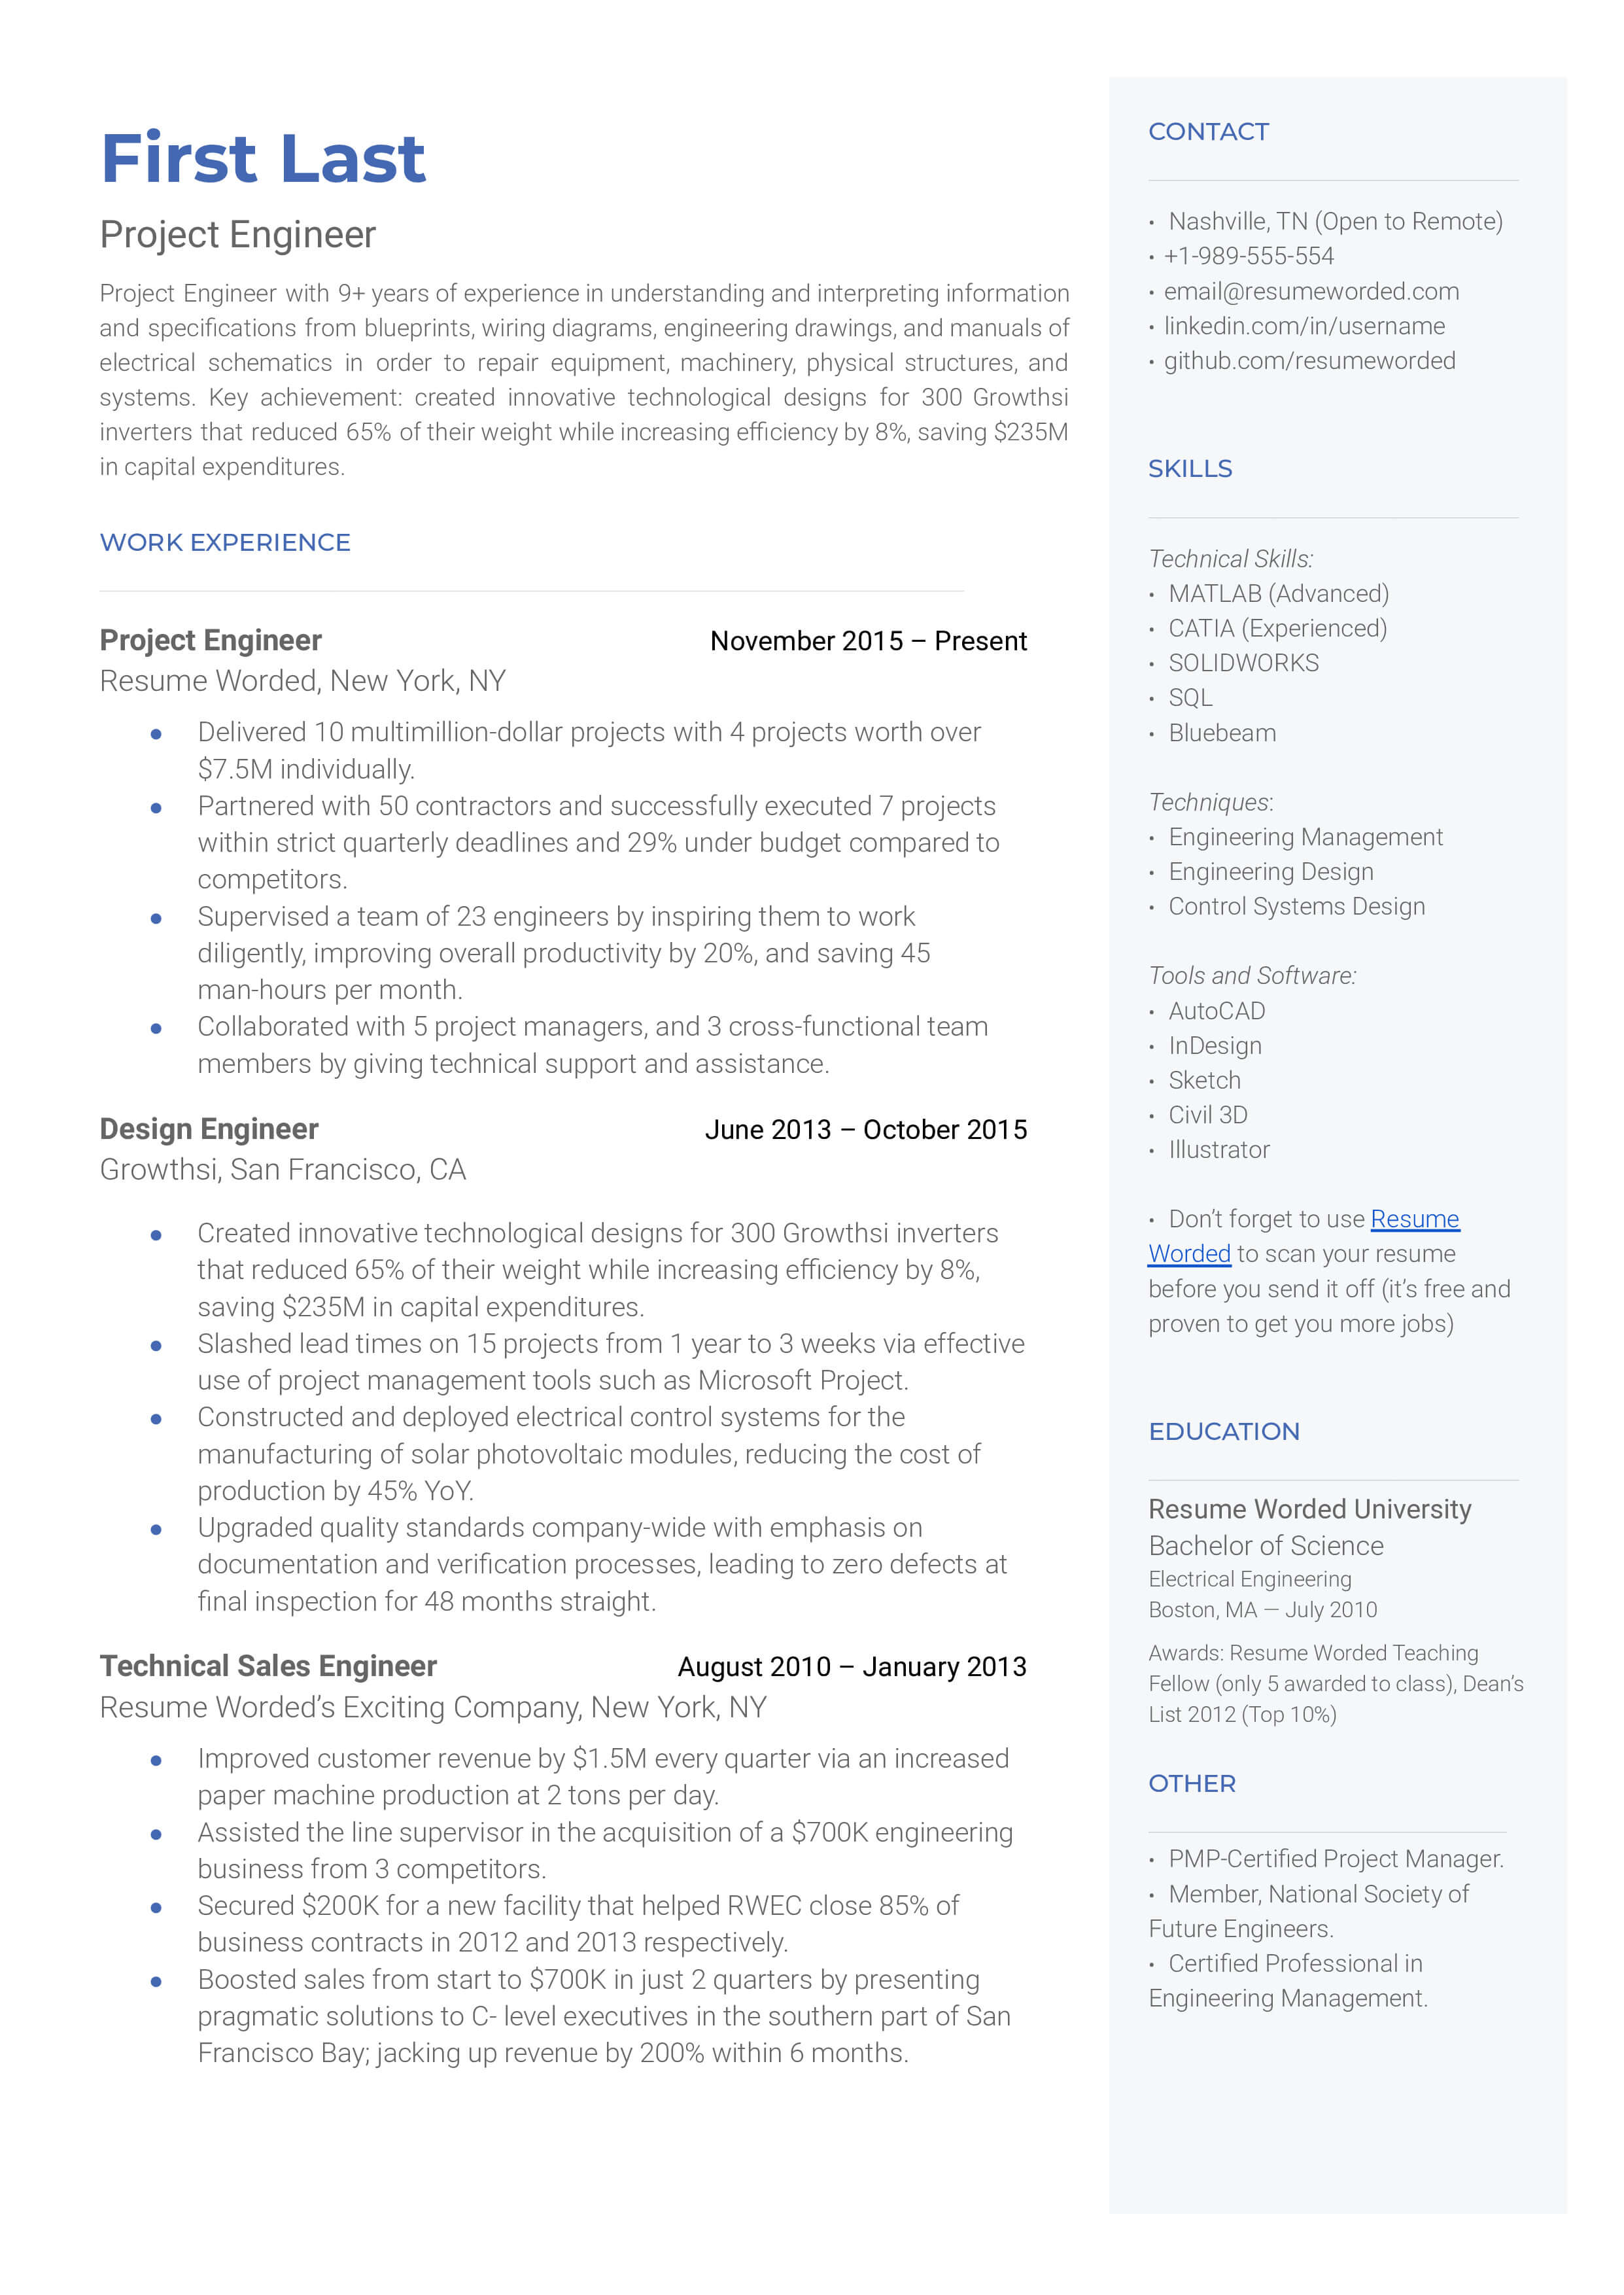 Example of a Project Engineer's CV showcasing industry-specific skills and experience.